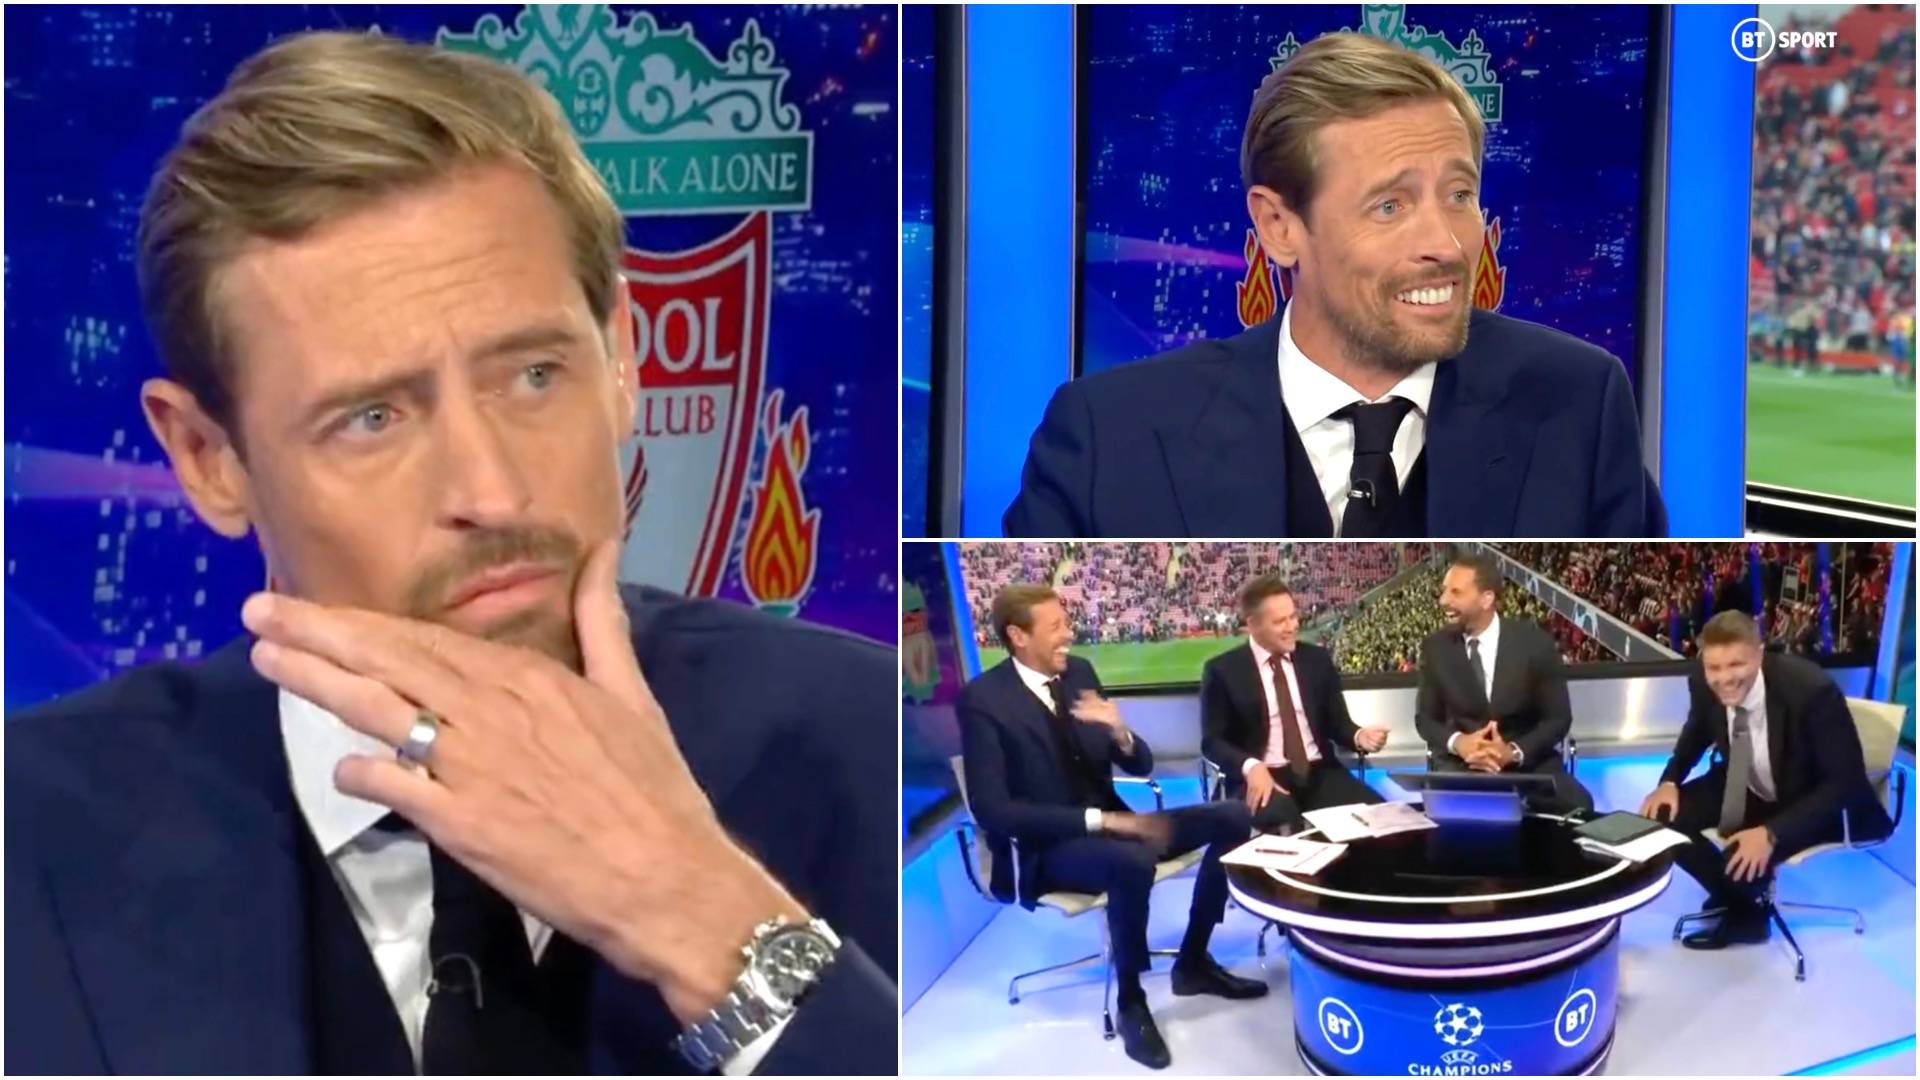 Peter Crouch had everyone in stitches when asked 'Who scored Liverpool's last SF goal at Anfield?'